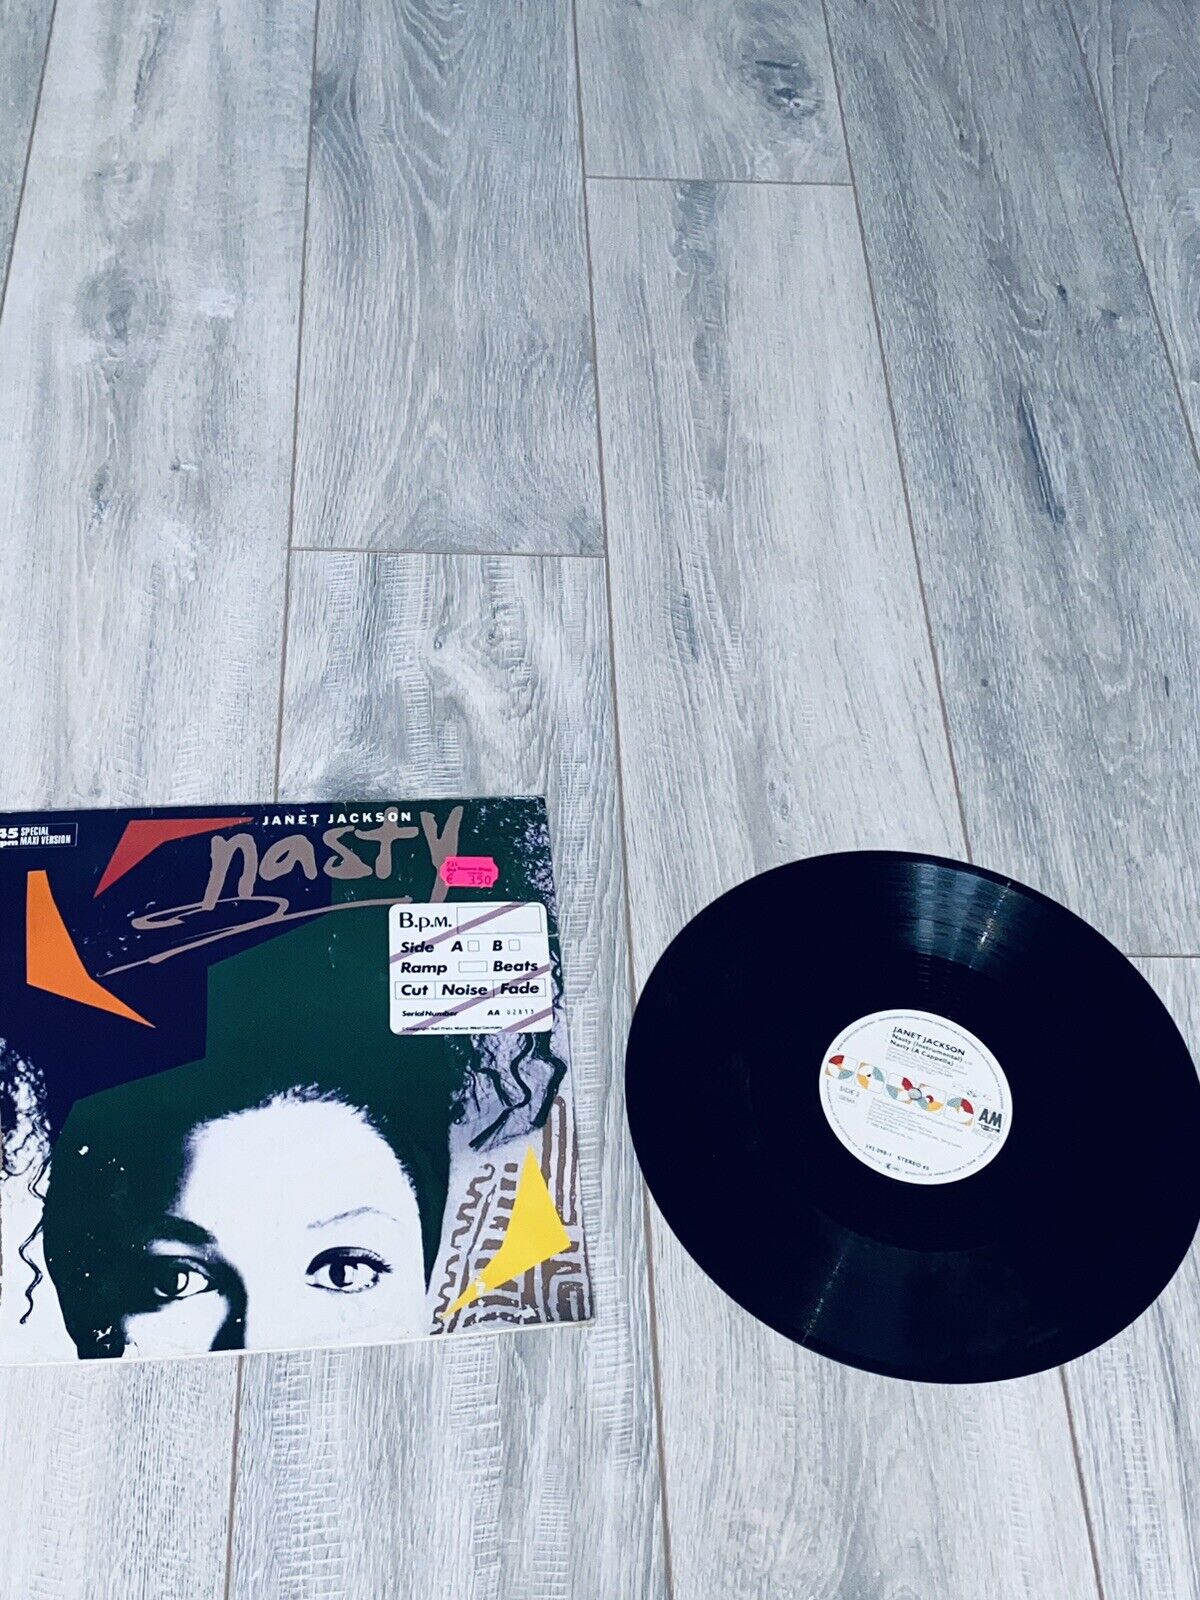 Janet Jackson Nasty 1986 12” Vinyl Record Single A&M Record Music 33 Cover